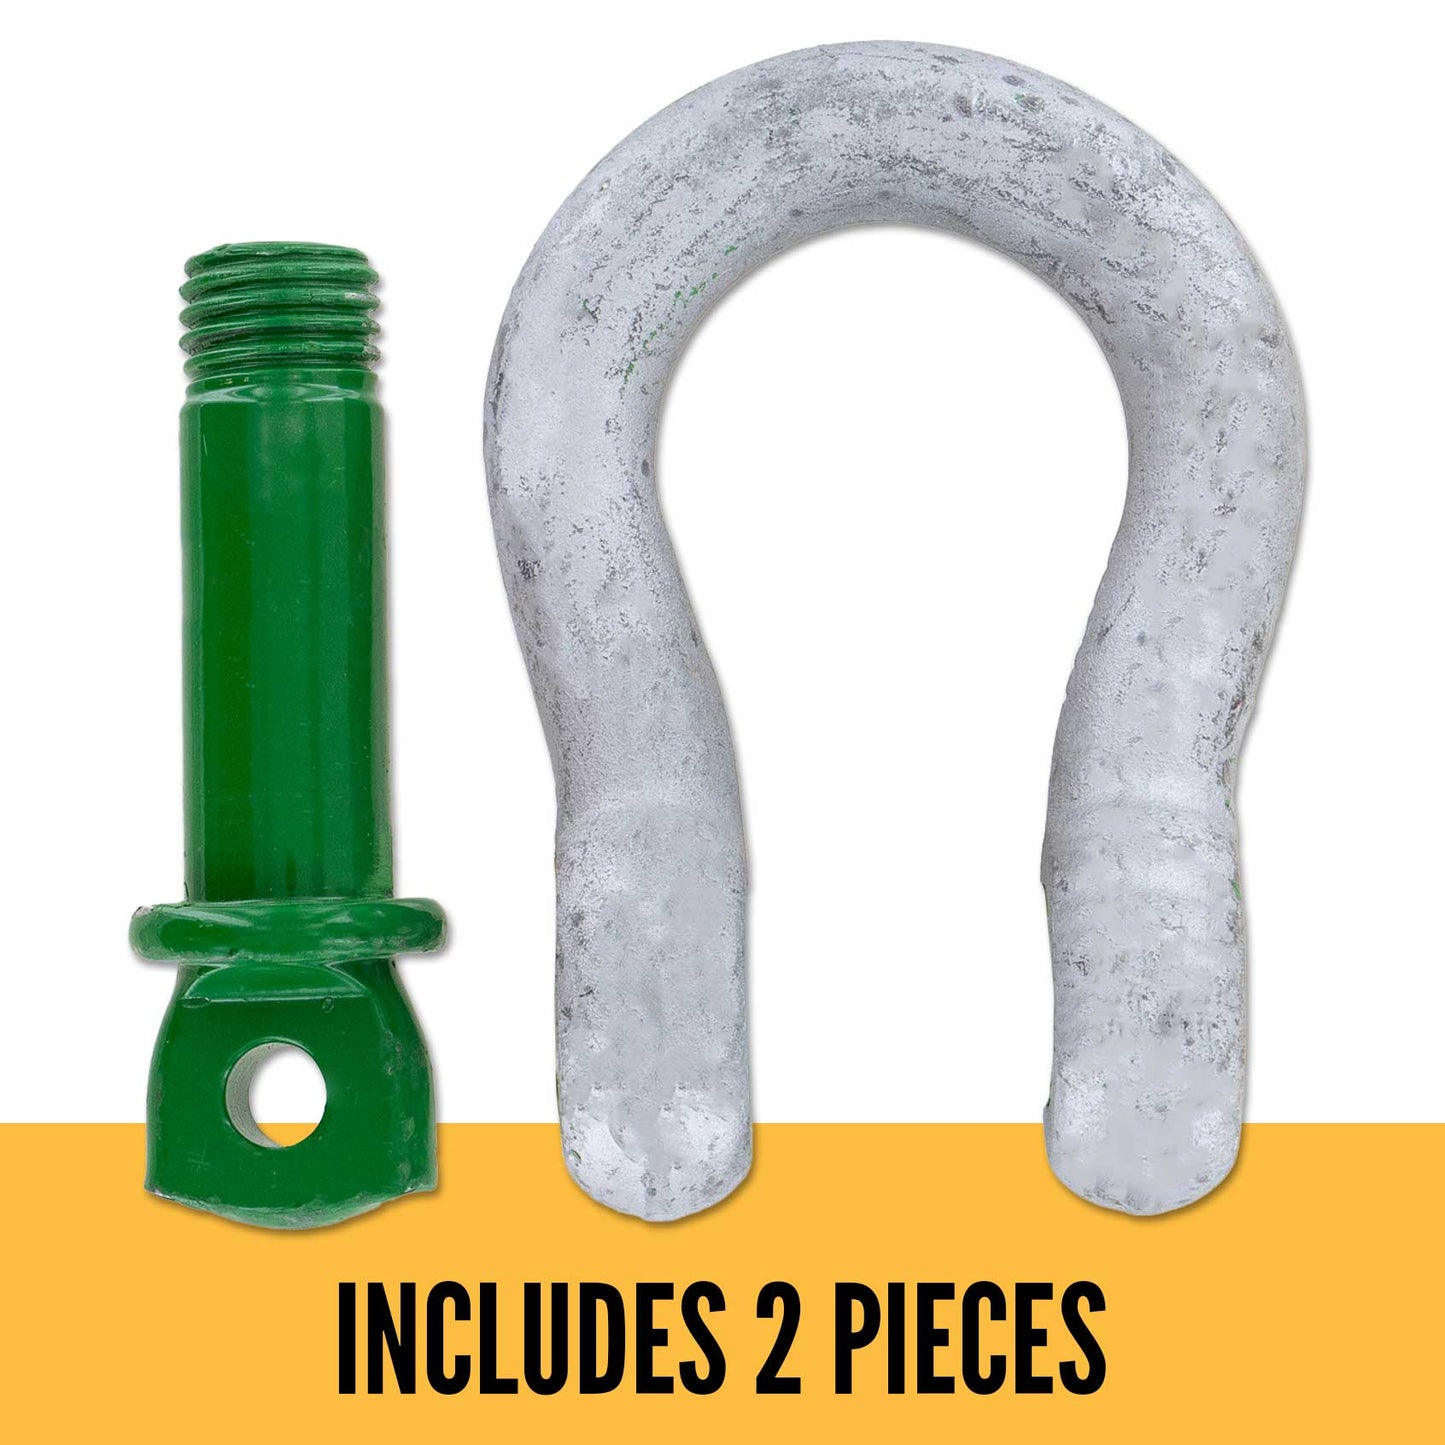 5/16" Van Beest Green Pin® Screw Pin Anchor Shackle | G-4161 - 0.75 Ton parts of a shackle